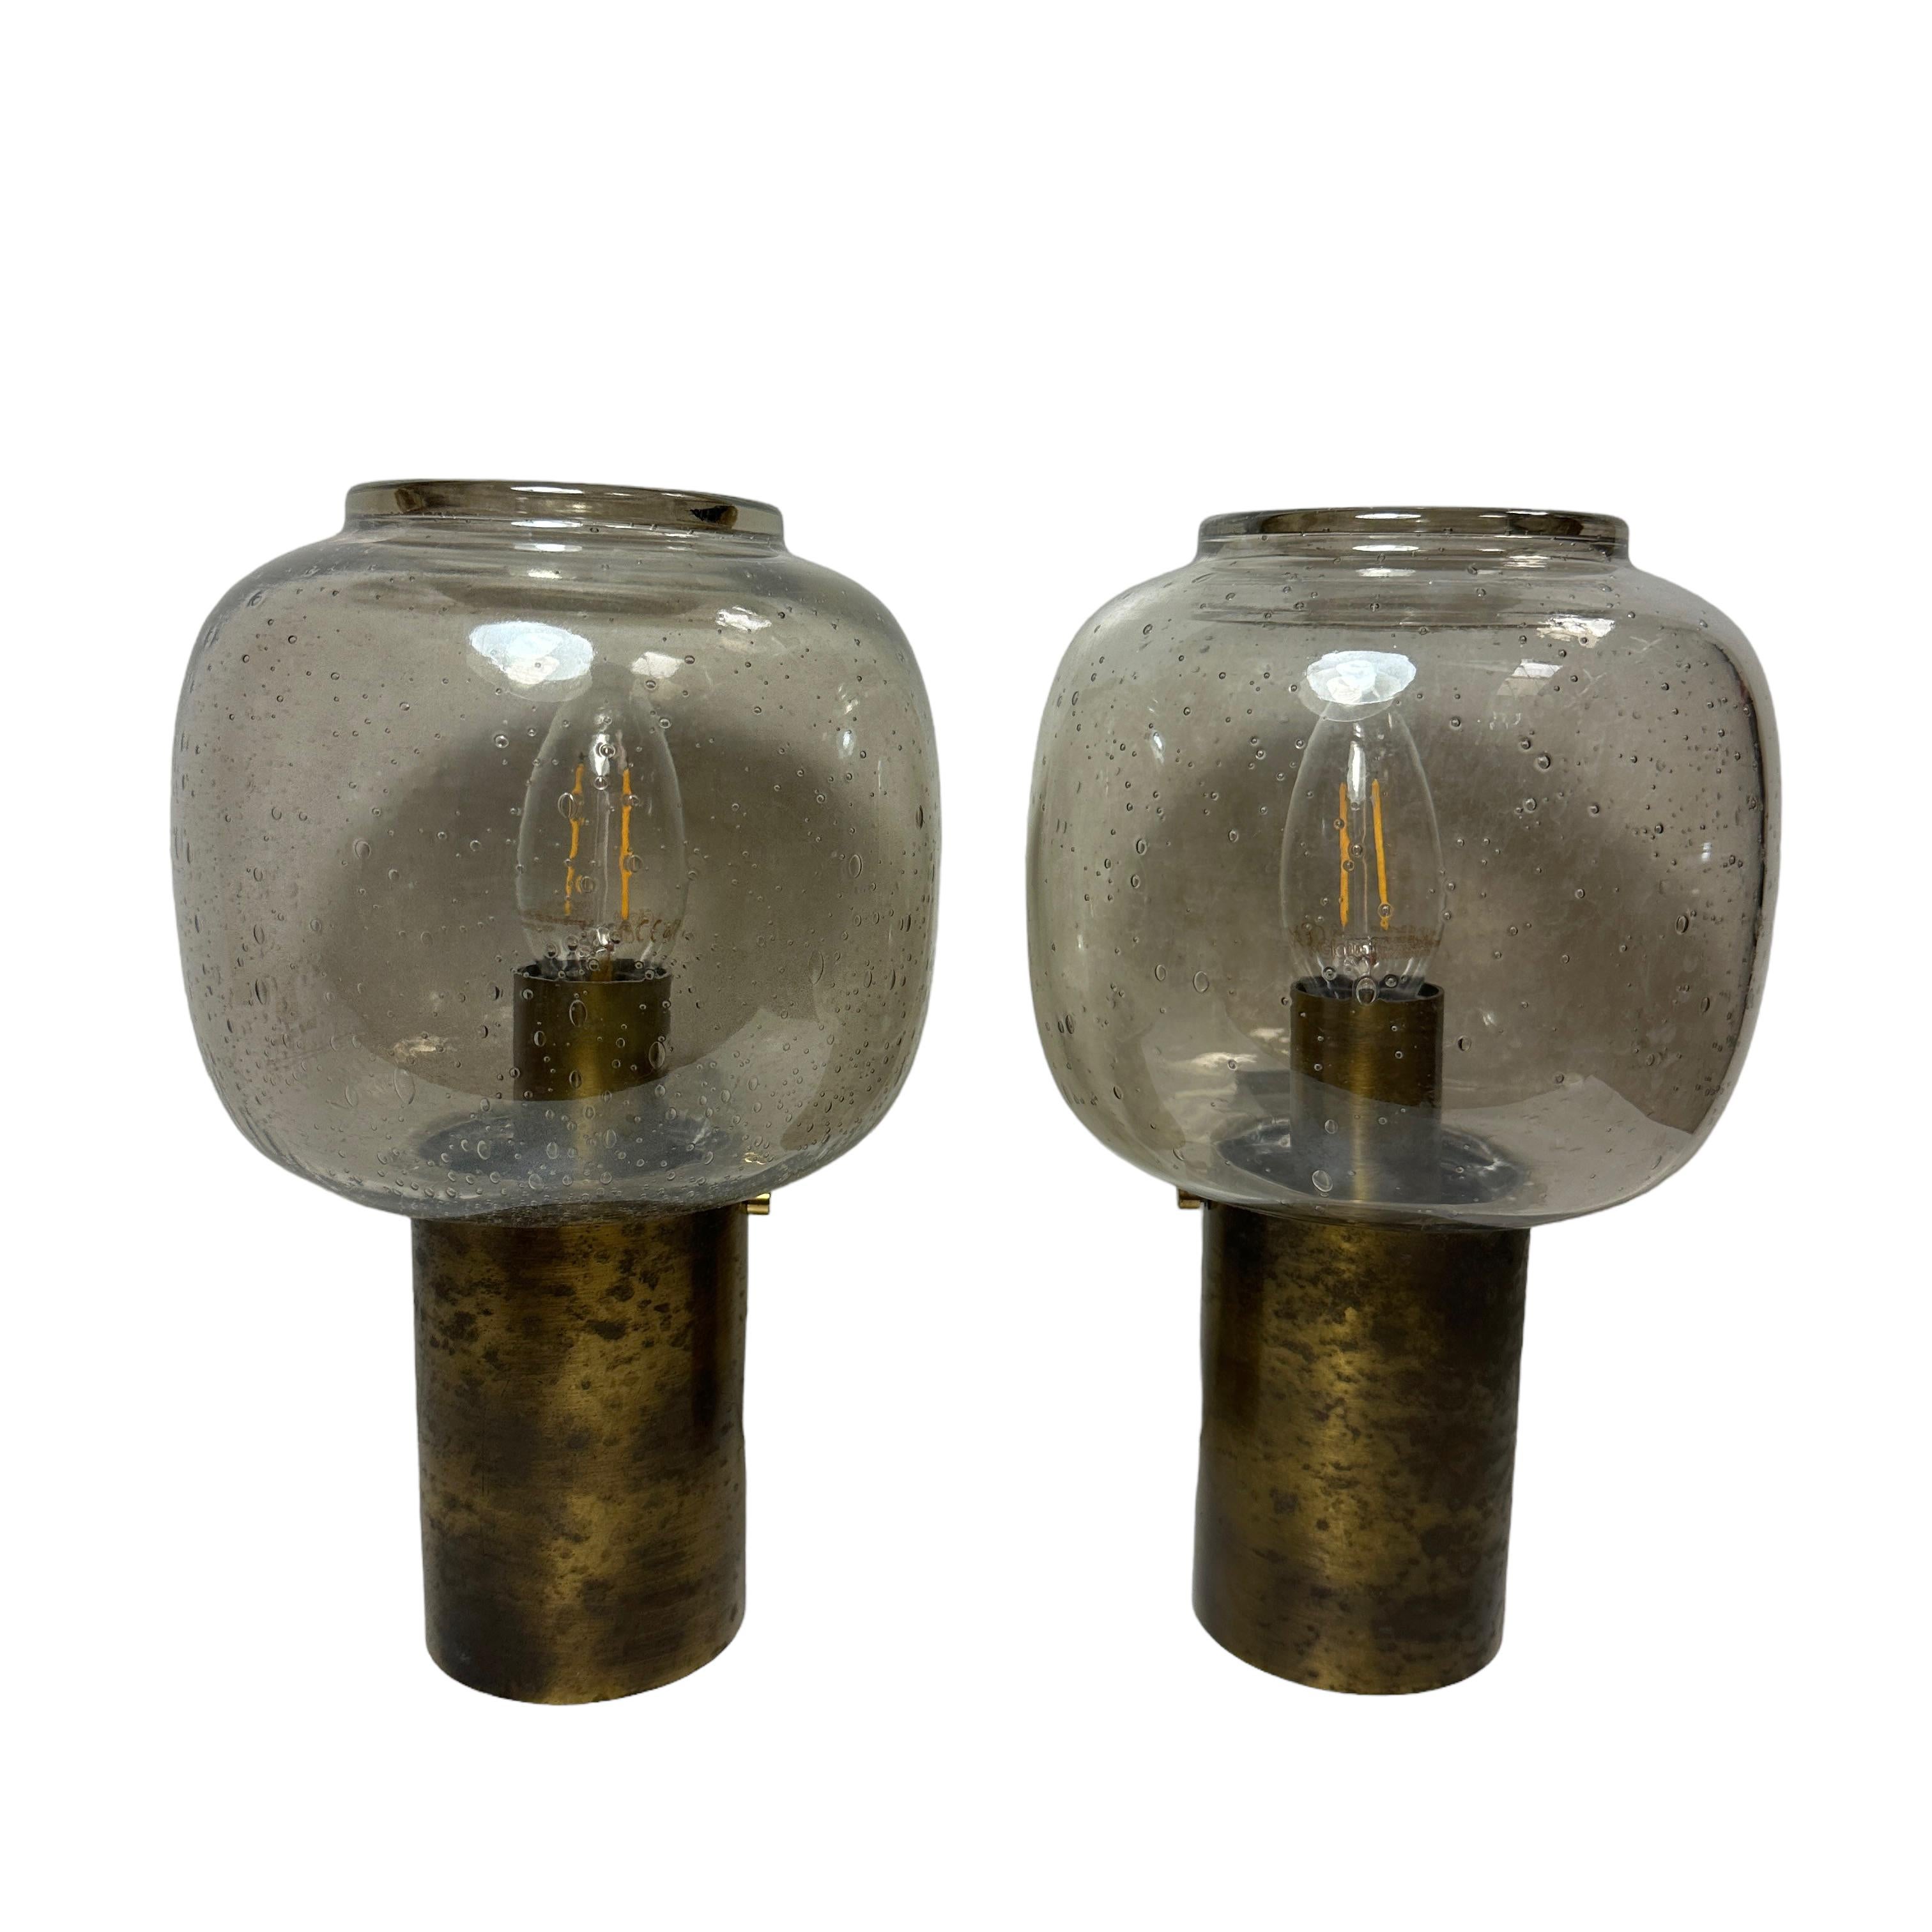 A stunning pair of tarnished brass and small air bubble smoked grey glass wall sconces. Each consisting of a stylish Mid-Century Modern style design. Each fixture requires an European E14 / 110 Volt candelabra bulb, up to 40 watts. Found at an